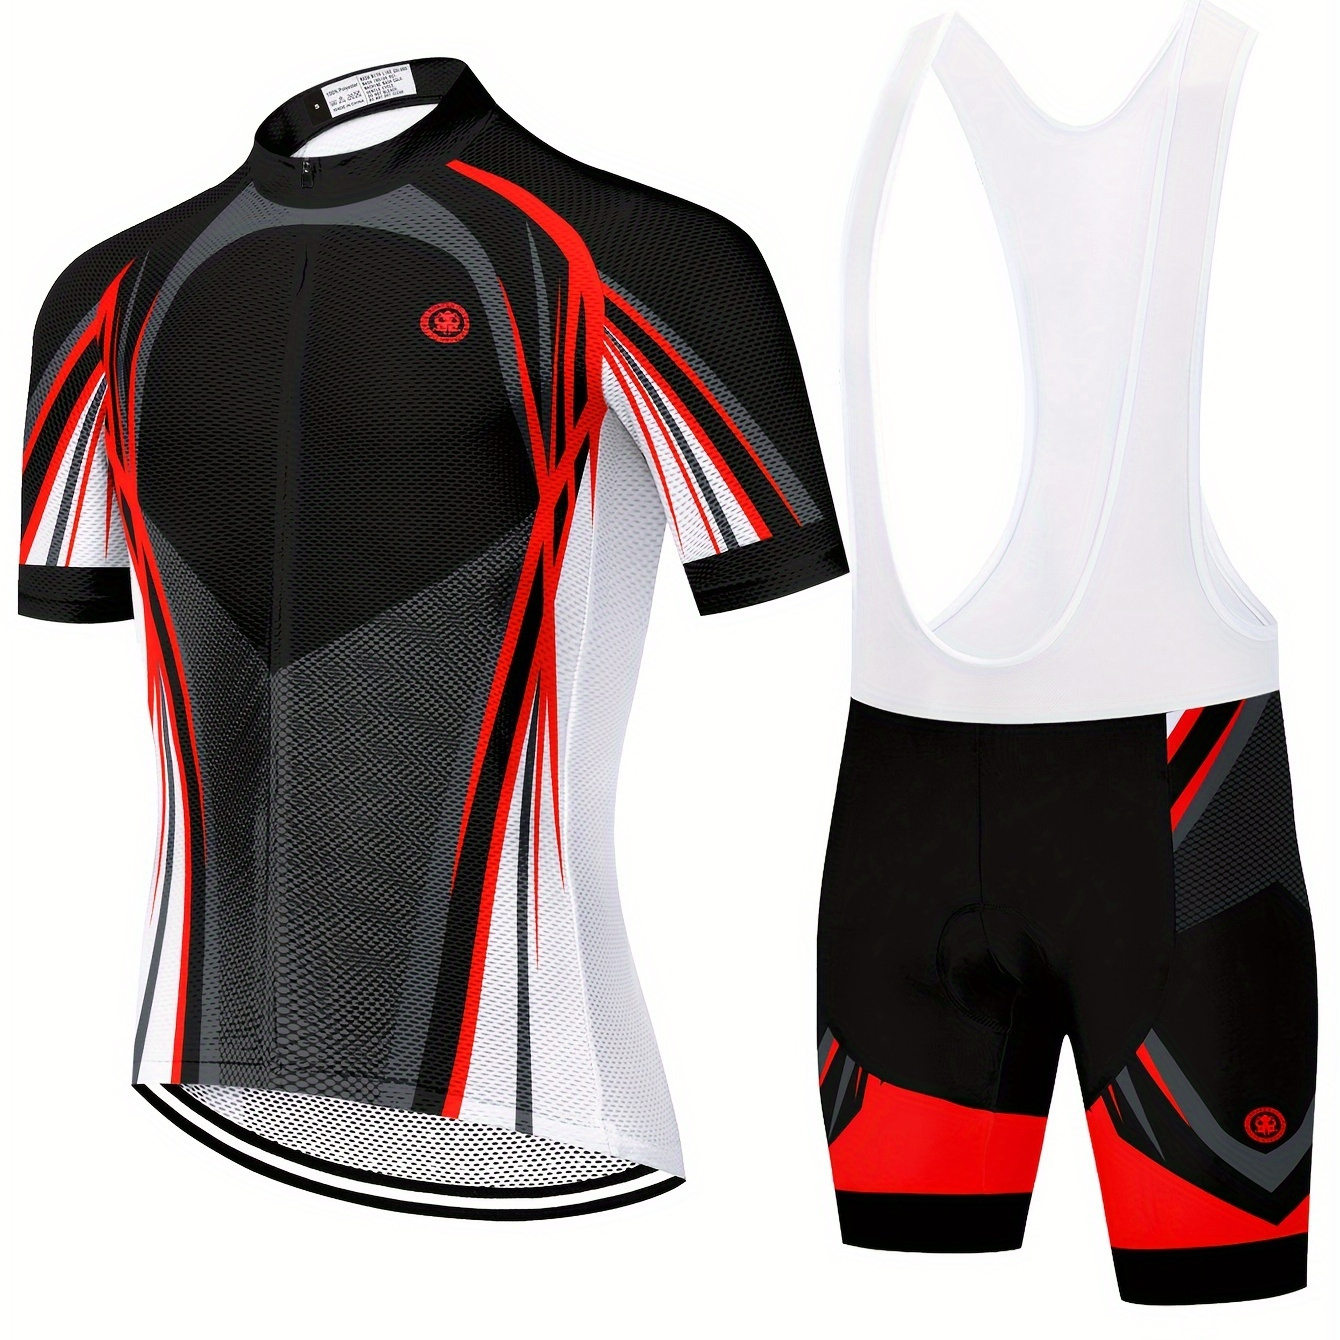 

Men's Outdoor Cycling Suit, Casual Quick Drying Short Sleeve Cycling Jersey + Cycling Bib Shorts With 20d Cushion Matching Set For Cycling